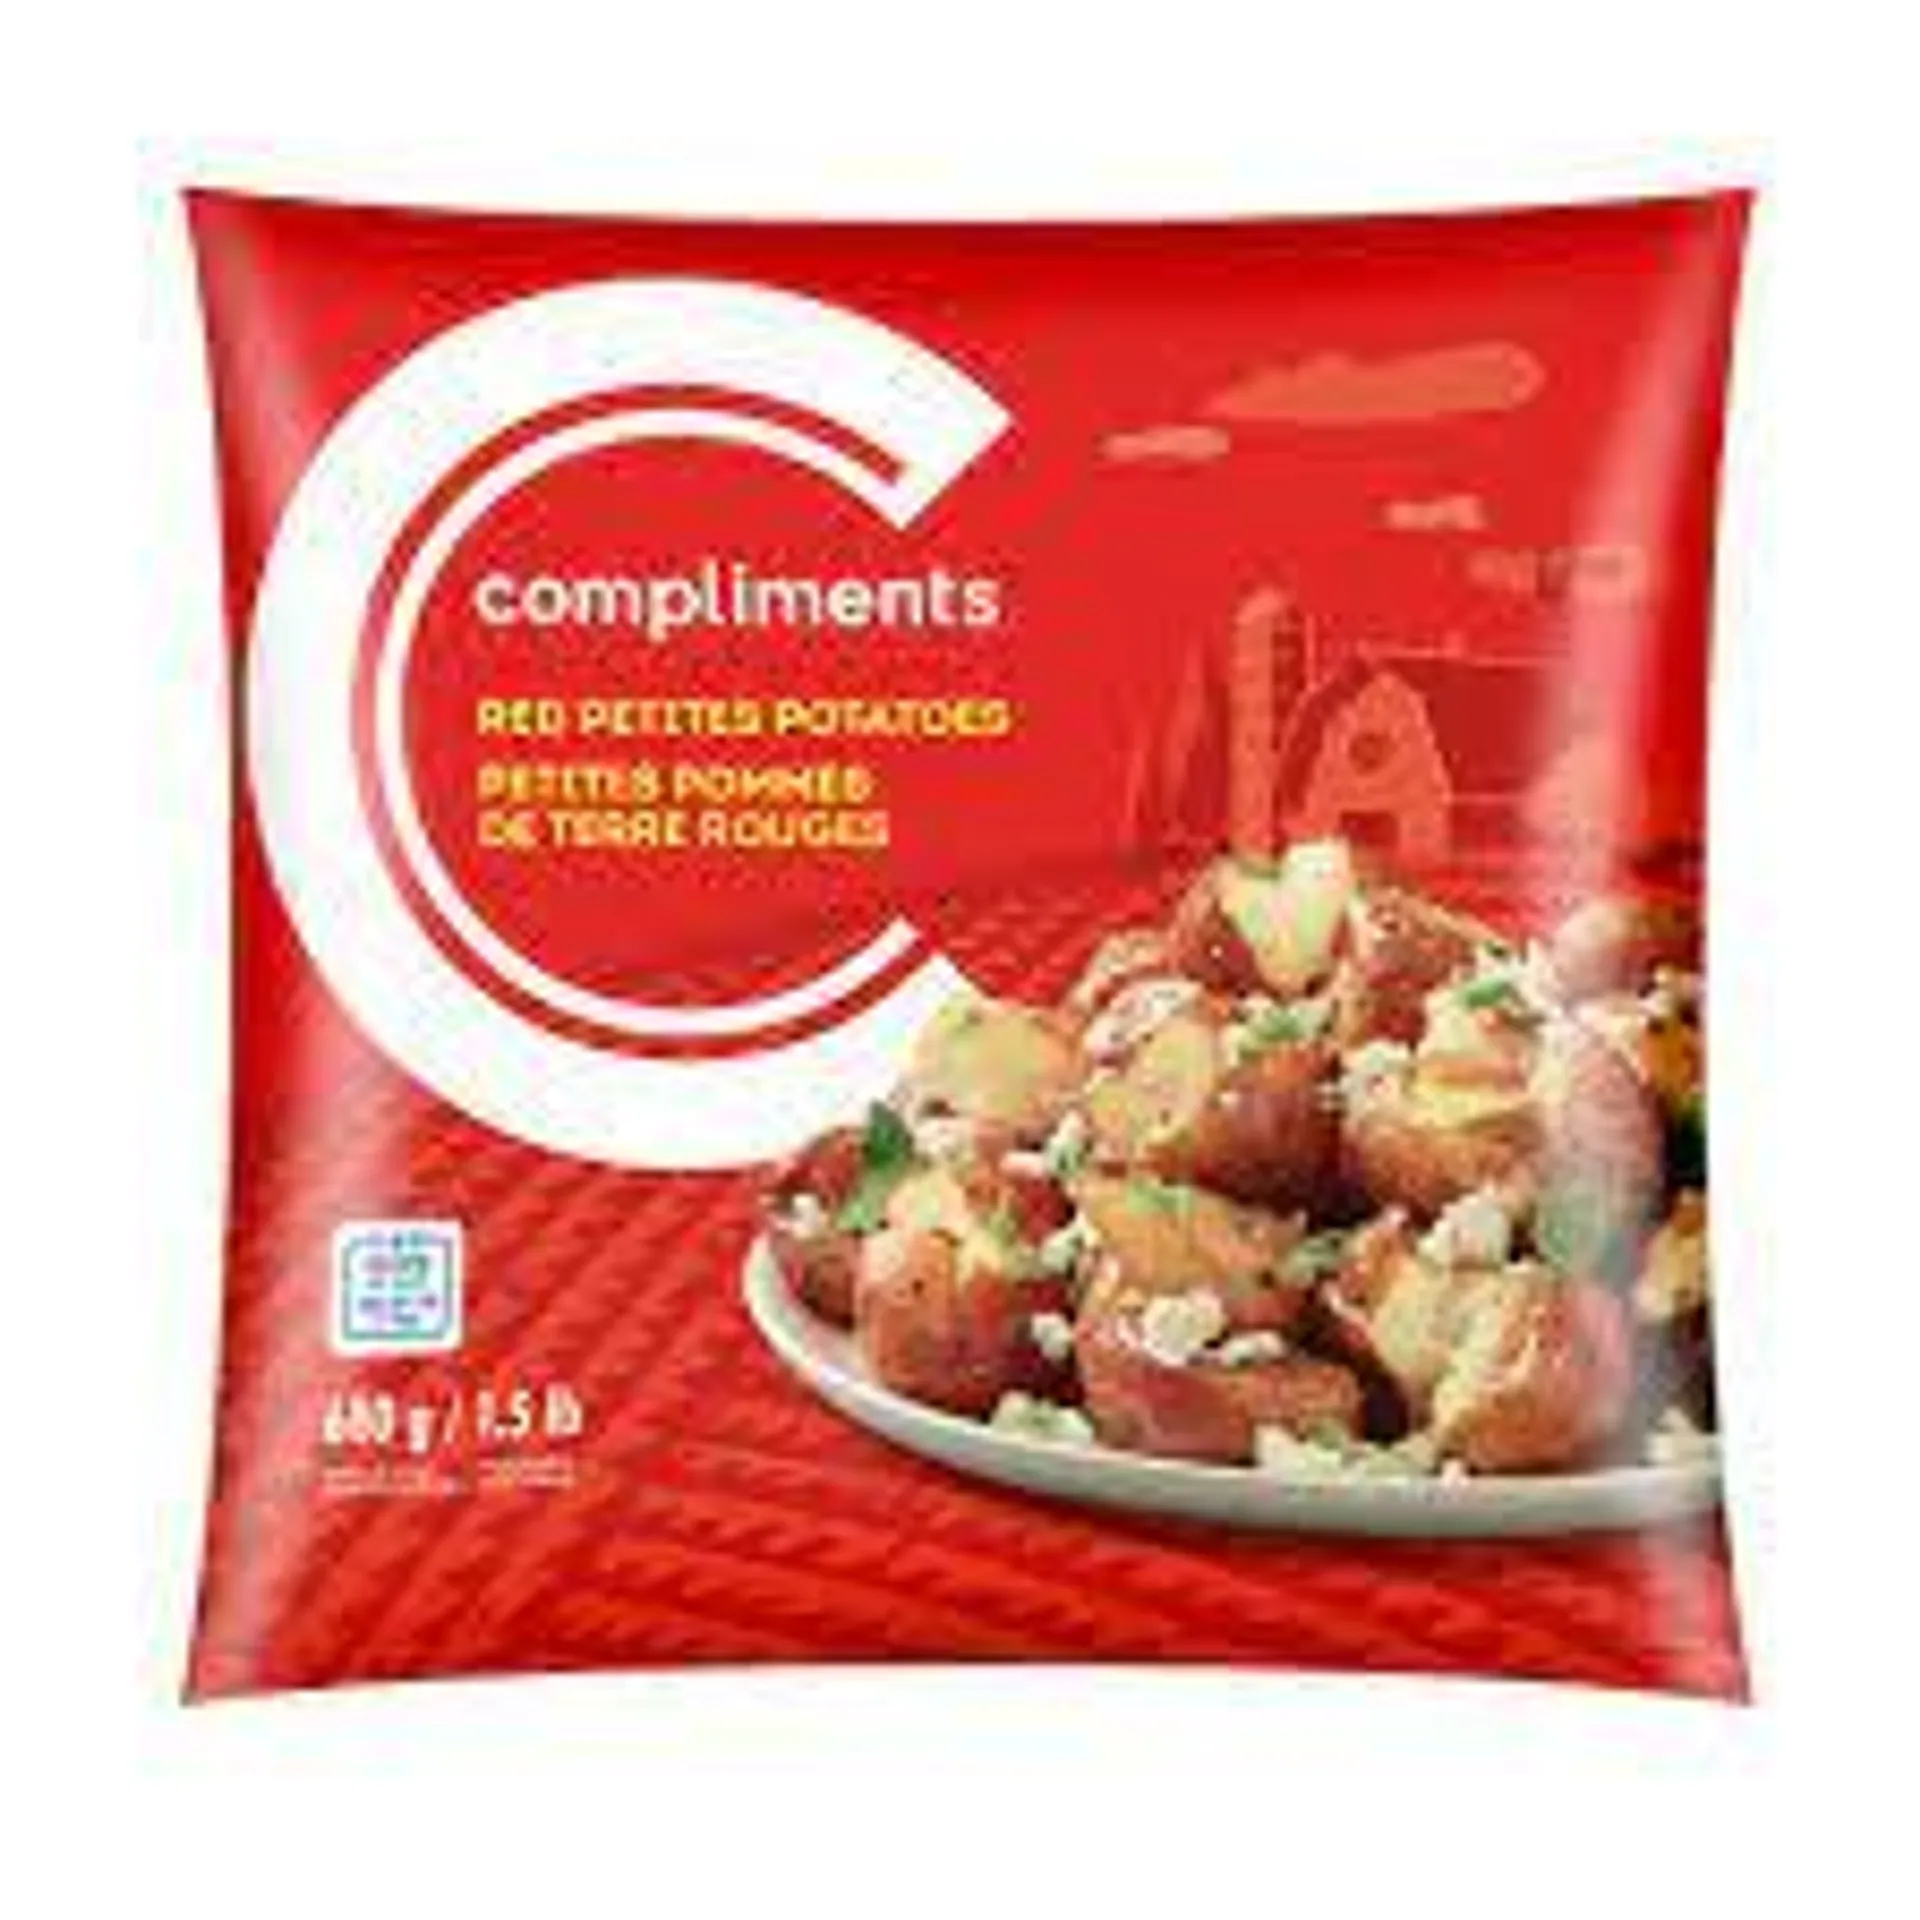 Compliments Baby Red Potatoes 680g